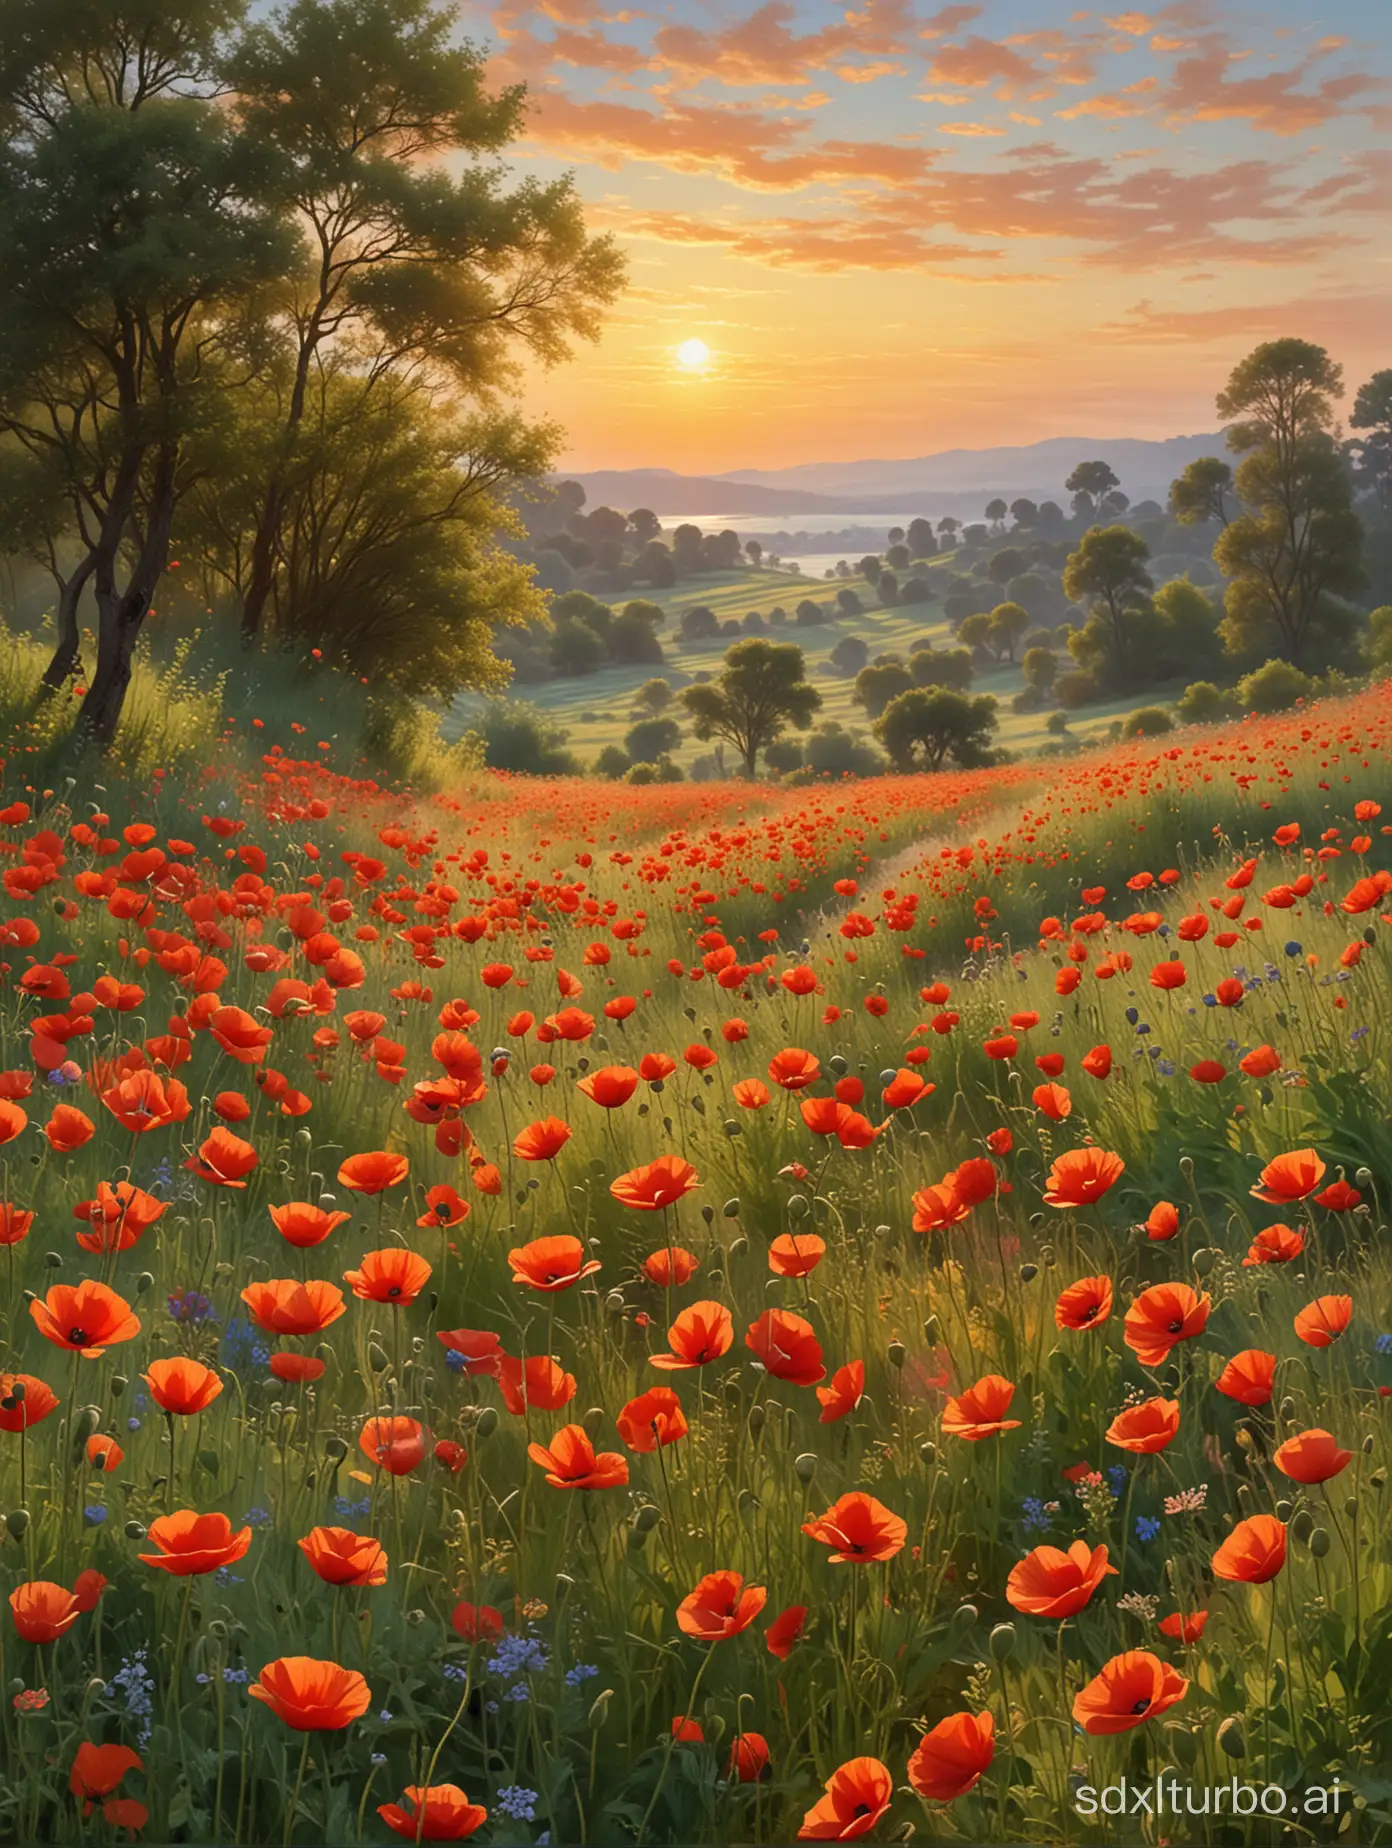 Serenity-in-Nature-Vibrant-Red-Poppies-Dancing-in-the-Sunset-Breeze